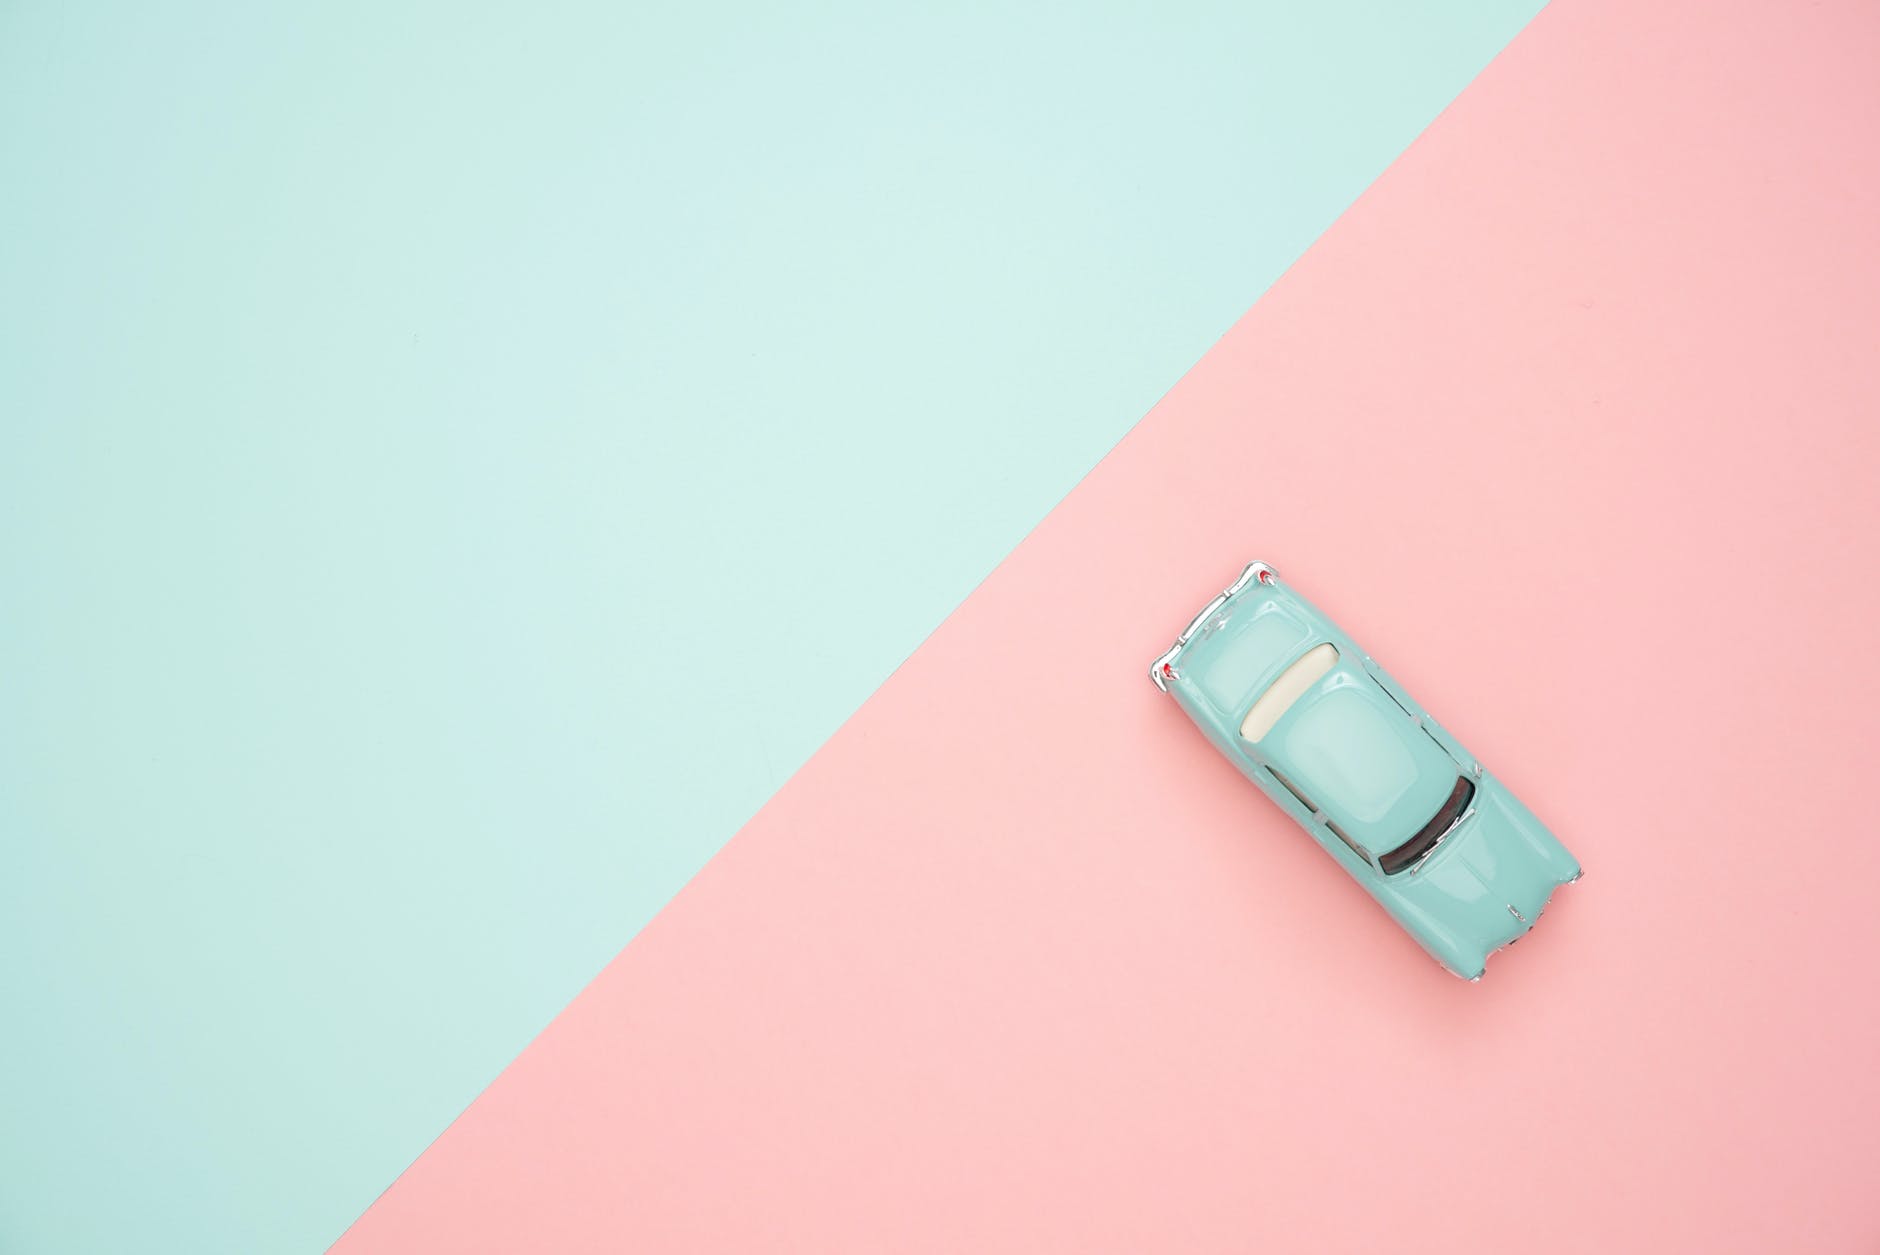 Blue and pink geometric photo with a small blue car 